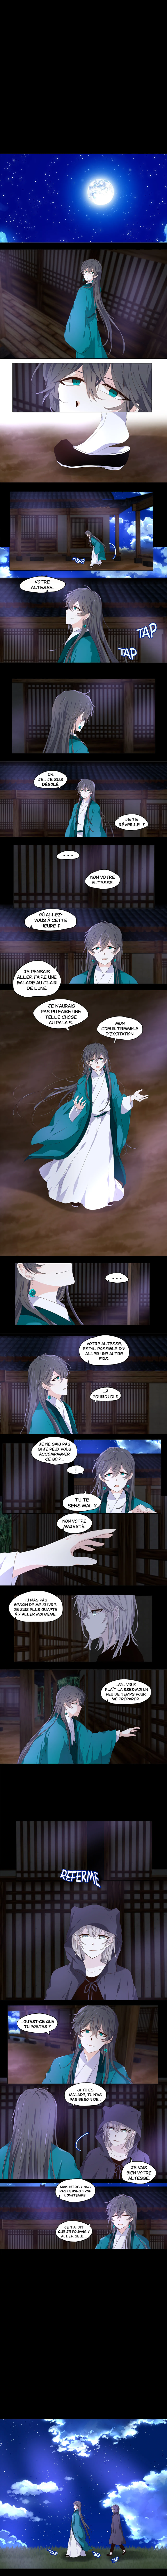 Dangeum And Jigyo: Chapter 5 - Page 1